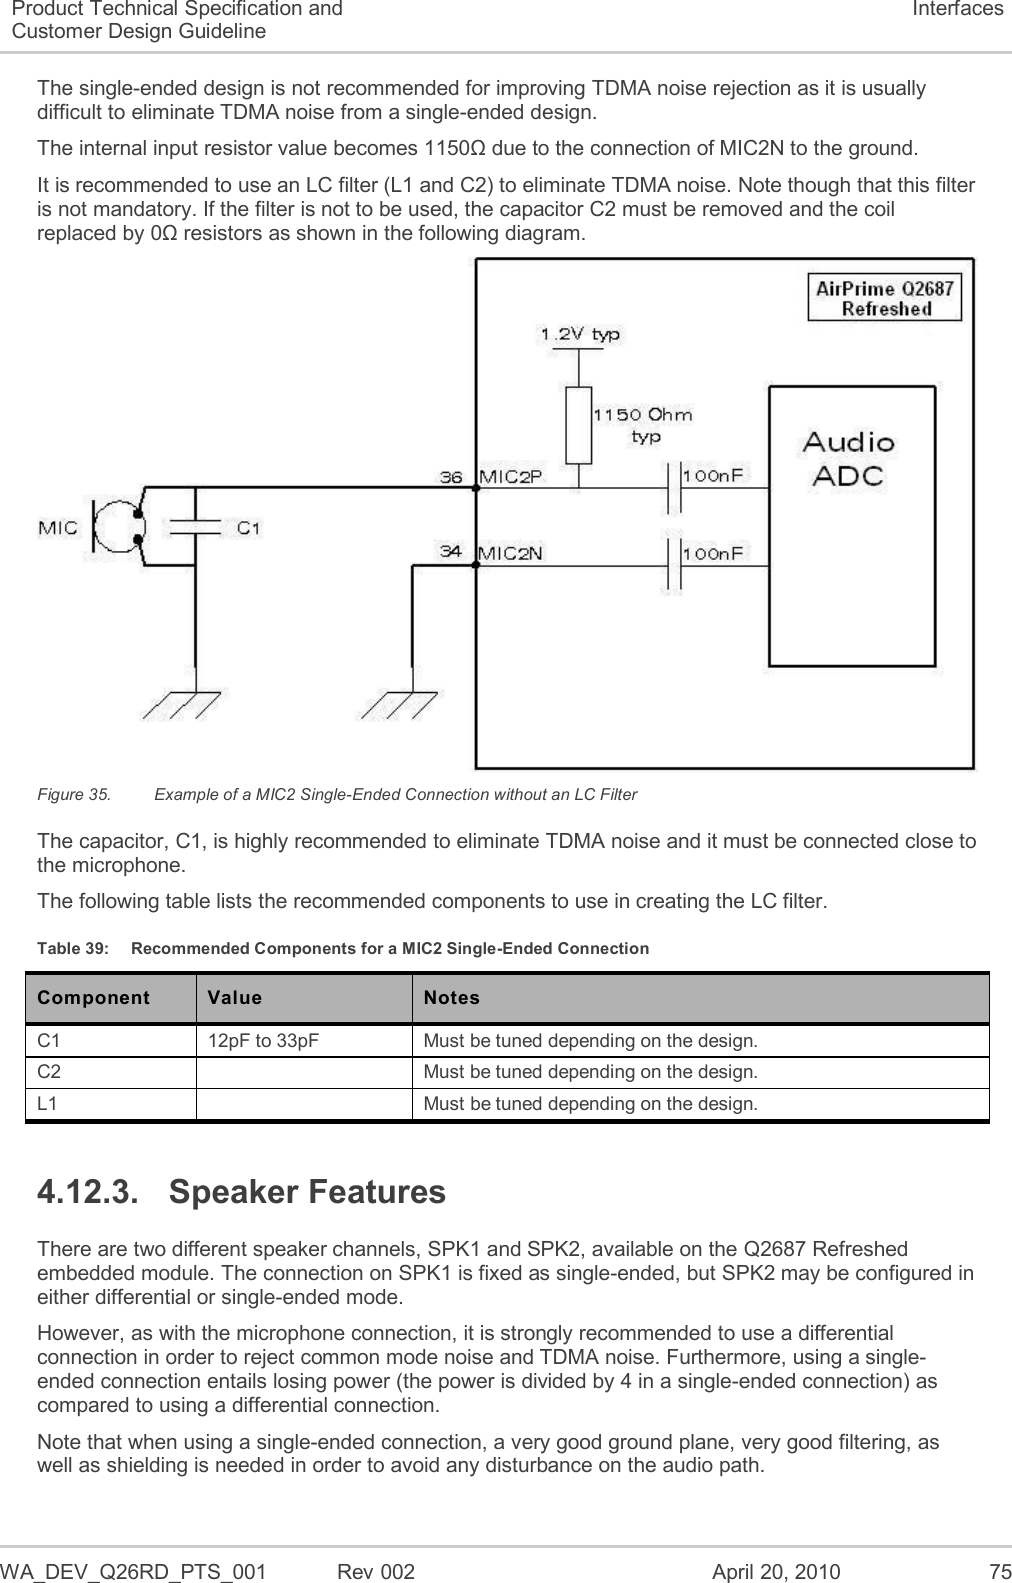  WA_DEV_Q26RD_PTS_001  Rev 002  April 20, 2010 75 Product Technical Specification and Customer Design Guideline Interfaces The single-ended design is not recommended for improving TDMA noise rejection as it is usually difficult to eliminate TDMA noise from a single-ended design. The internal input resistor value becomes 1150Ω due to the connection of MIC2N to the ground. It is recommended to use an LC filter (L1 and C2) to eliminate TDMA noise. Note though that this filter is not mandatory. If the filter is not to be used, the capacitor C2 must be removed and the coil replaced by 0Ω resistors as shown in the following diagram.  Figure 35.  Example of a MIC2 Single-Ended Connection without an LC Filter The capacitor, C1, is highly recommended to eliminate TDMA noise and it must be connected close to the microphone. The following table lists the recommended components to use in creating the LC filter. Table 39:  Recommended Components for a MIC2 Single-Ended Connection Component Value Notes C1 12pF to 33pF Must be tuned depending on the design. C2  Must be tuned depending on the design. L1  Must be tuned depending on the design. 4.12.3.  Speaker Features There are two different speaker channels, SPK1 and SPK2, available on the Q2687 Refreshed embedded module. The connection on SPK1 is fixed as single-ended, but SPK2 may be configured in either differential or single-ended mode. However, as with the microphone connection, it is strongly recommended to use a differential connection in order to reject common mode noise and TDMA noise. Furthermore, using a single-ended connection entails losing power (the power is divided by 4 in a single-ended connection) as compared to using a differential connection. Note that when using a single-ended connection, a very good ground plane, very good filtering, as well as shielding is needed in order to avoid any disturbance on the audio path. 